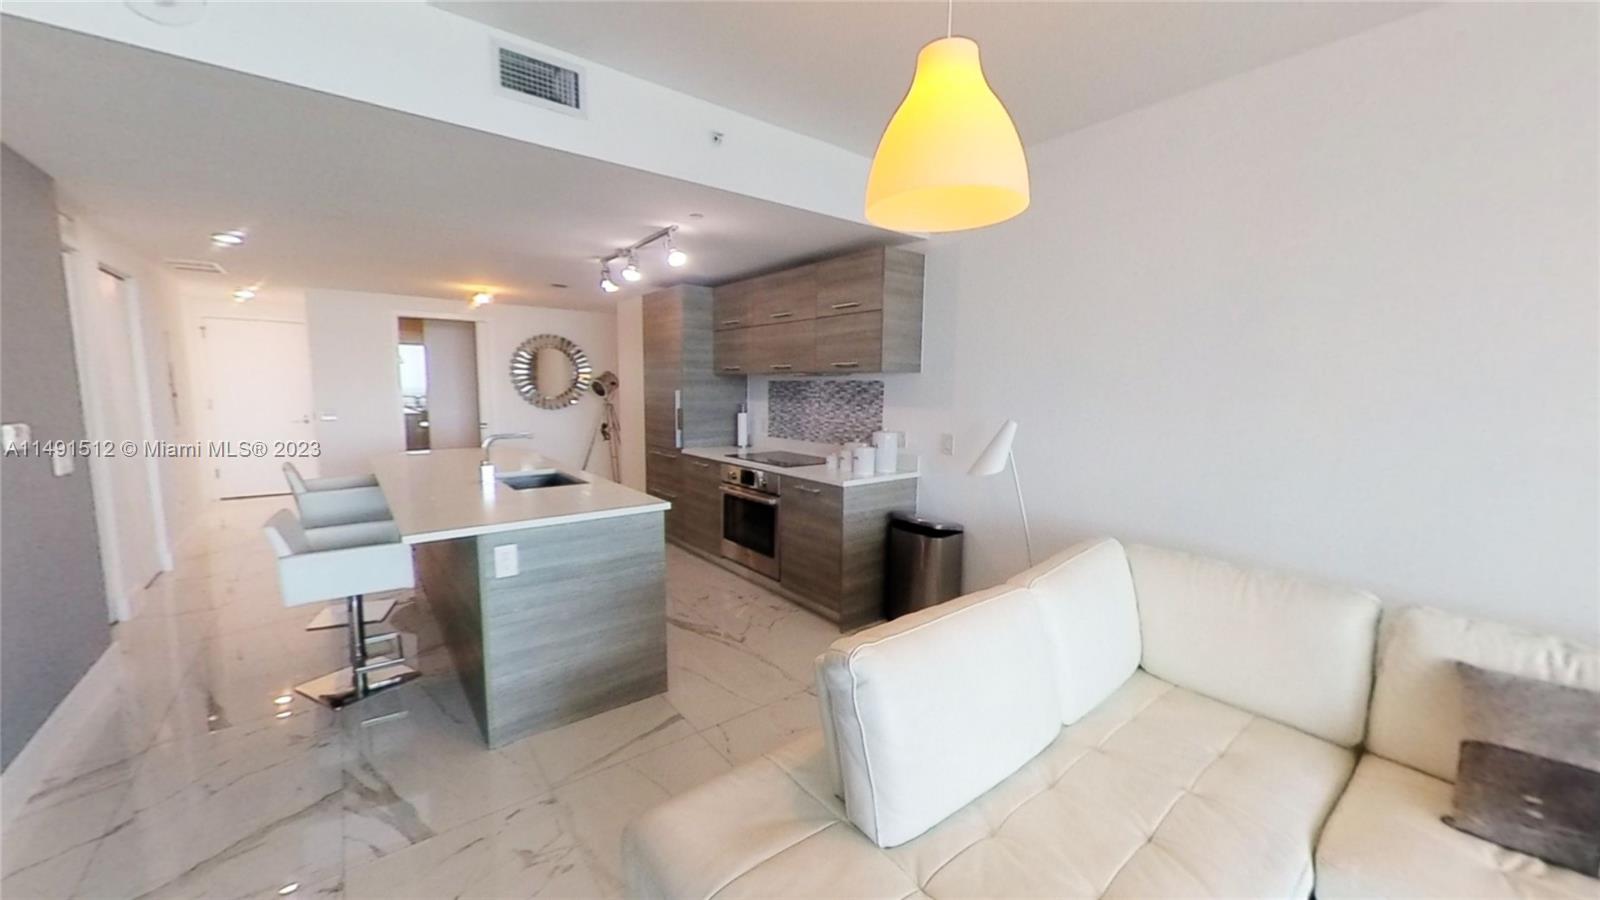 Excellent opportunity for this beautiful property in Paraiso Bay condominium located in Edgewater, Miami. This unit features 2 bedrooms, 3 bathrooms + DEN. European-style stainless steel appliances by Bosch. The condominium offers amenities such as a gym, party room, pool, spa, lobby, valet parking, and much more.

Showings must be scheduled with a 72-hour notice; the unit is currently occupied by tenants until July 31.